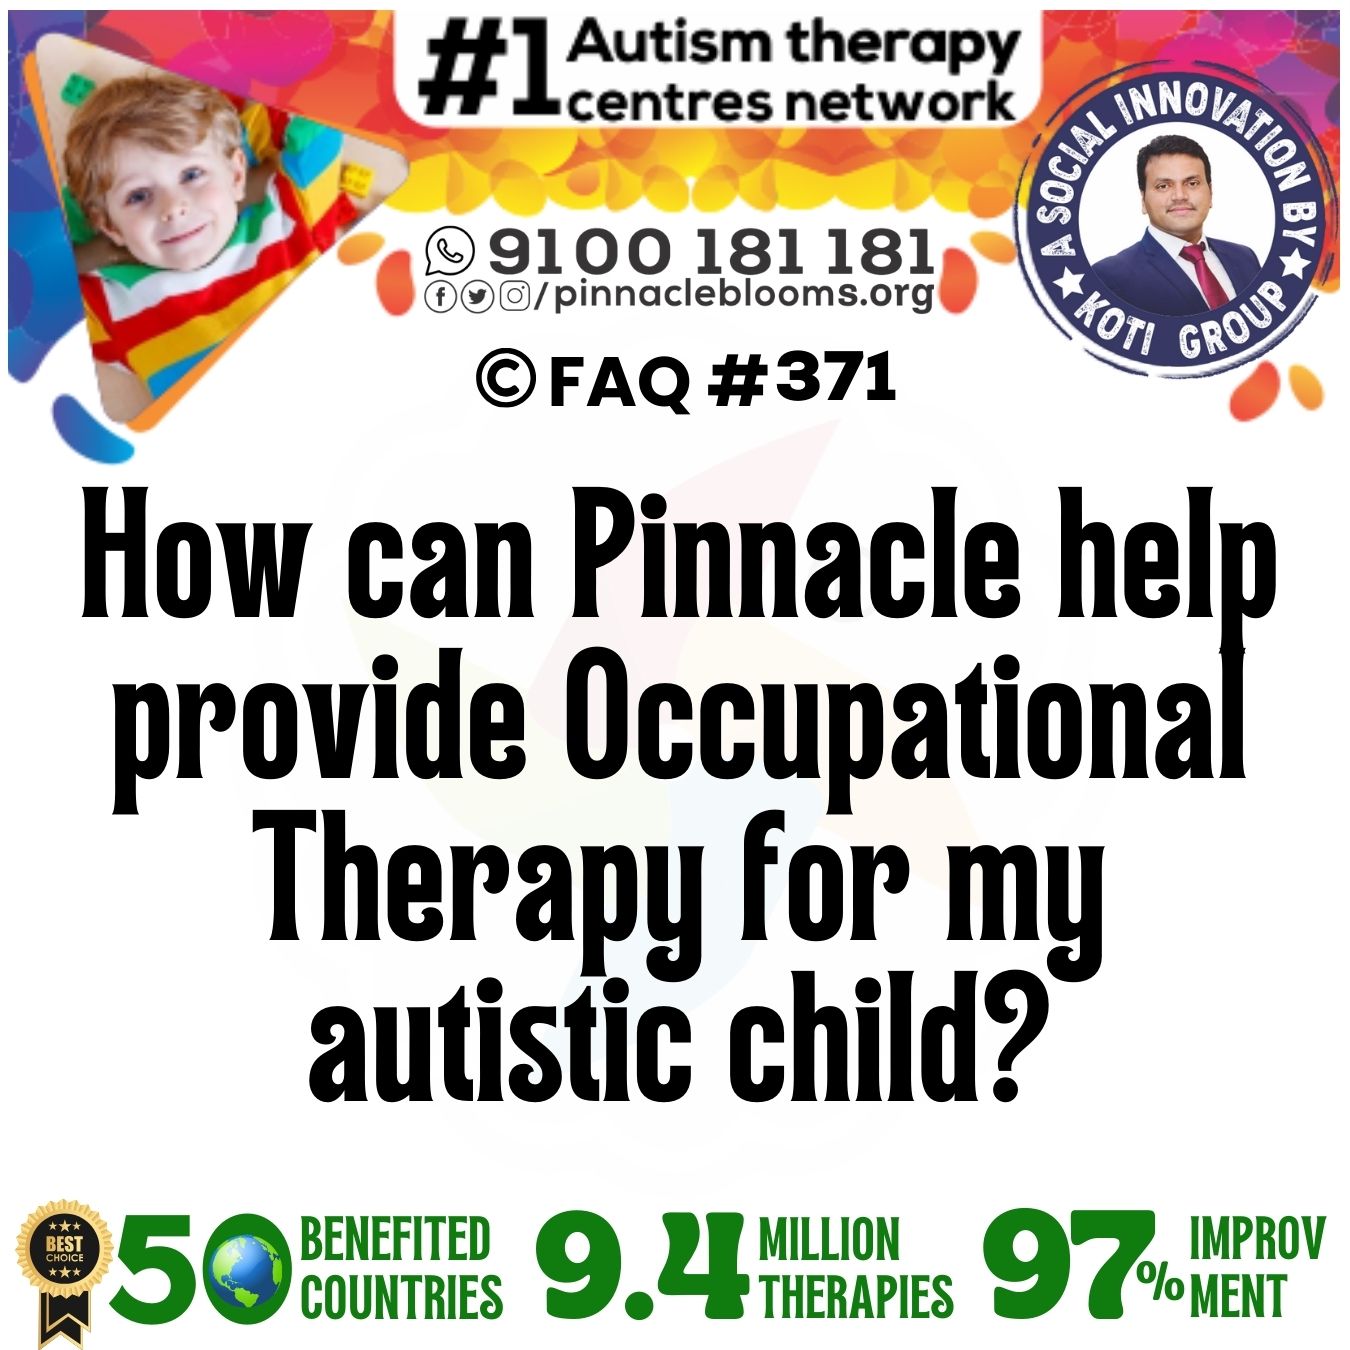 How can Pinnacle help provide Occupational Therapy for my autistic child?